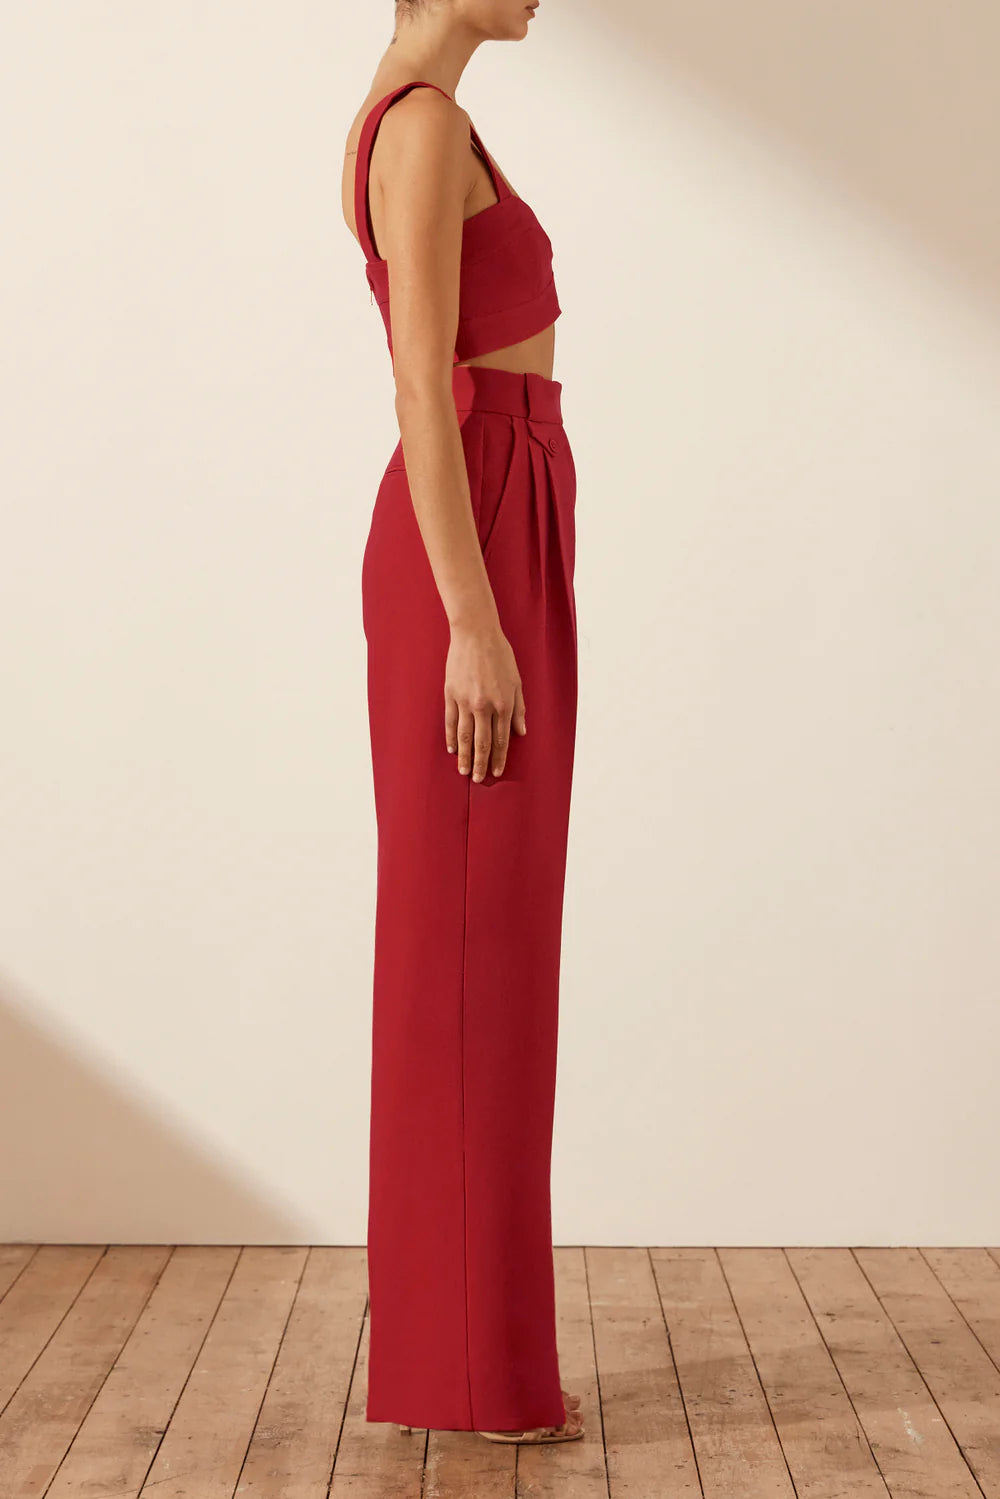 IRENA HIGHWAISTED TAILORED PANT - ROMA RED